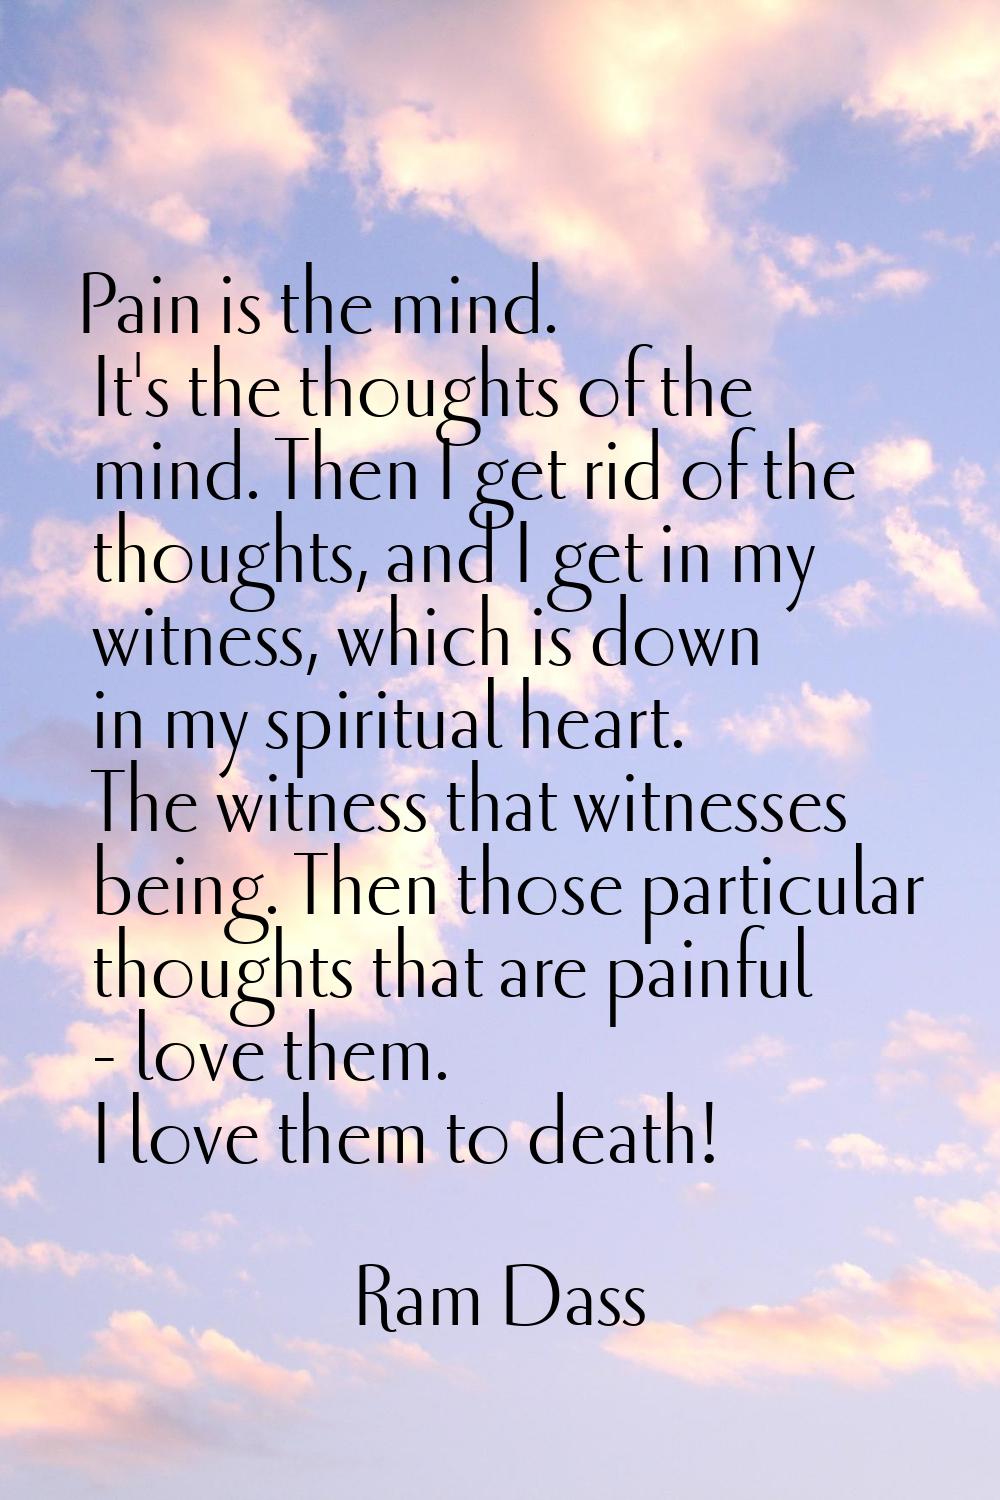 Pain is the mind. It's the thoughts of the mind. Then I get rid of the thoughts, and I get in my wi